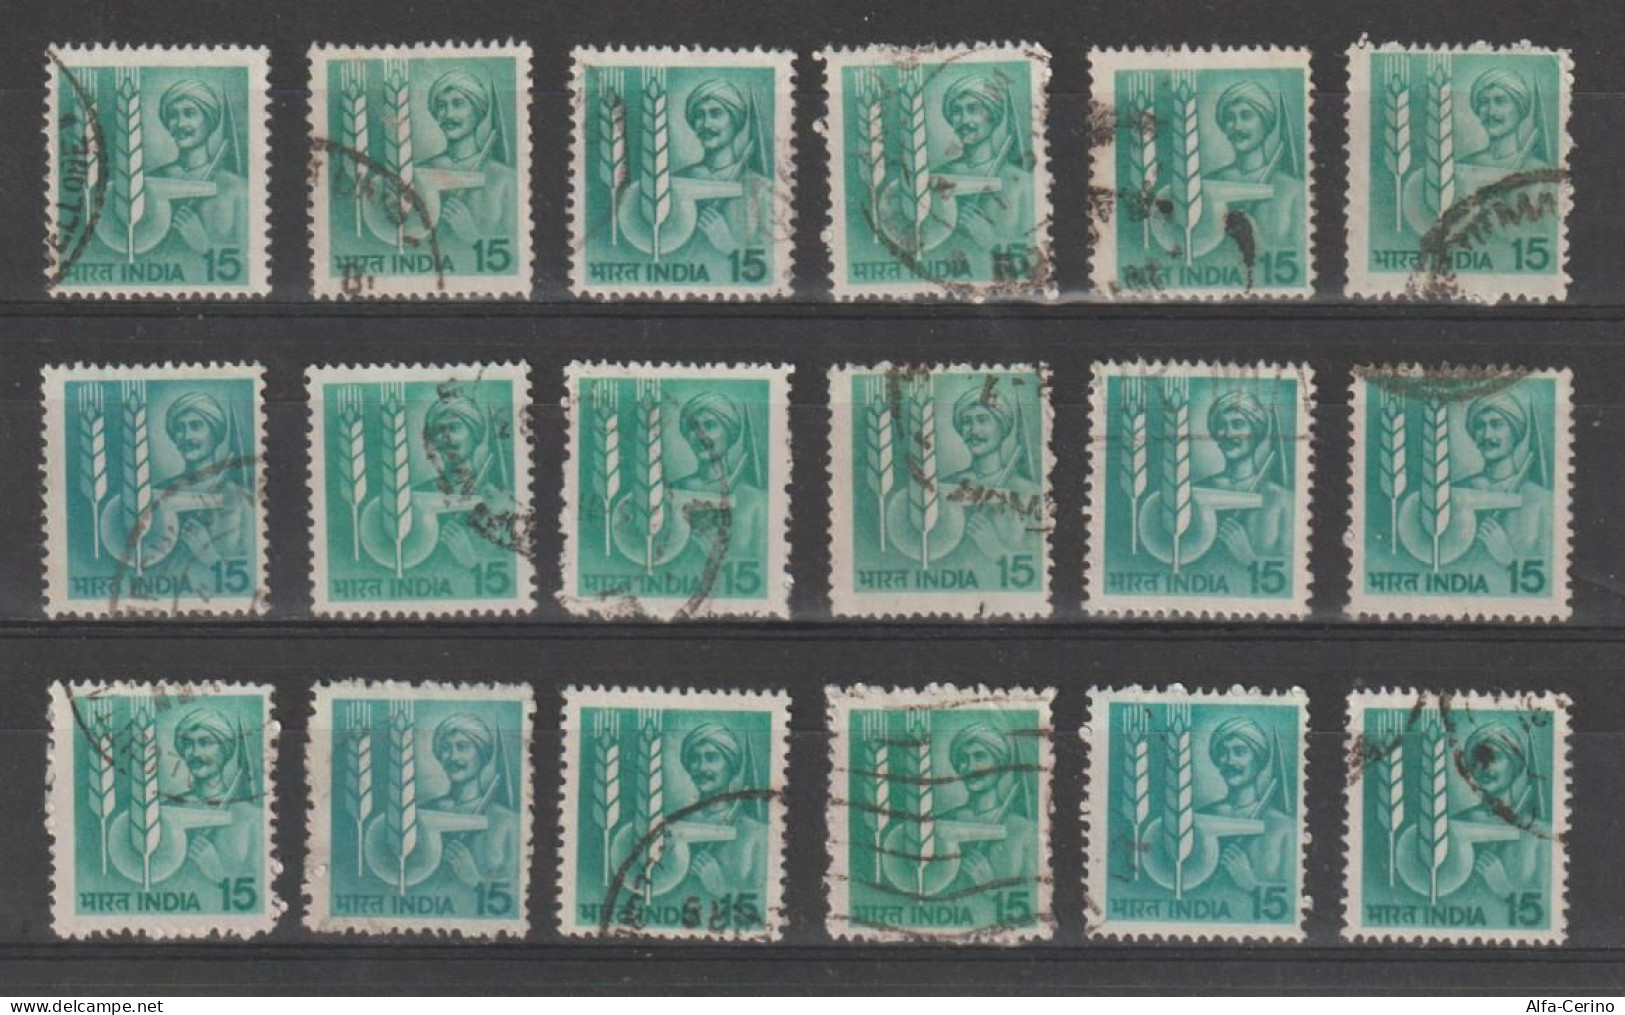 INDIA:  1980  AGRICOLTURA  -  15 P.  VERDE  US. -  RIPETUTO  18  VOLTE  -  YV/TELL. 612 - Used Stamps